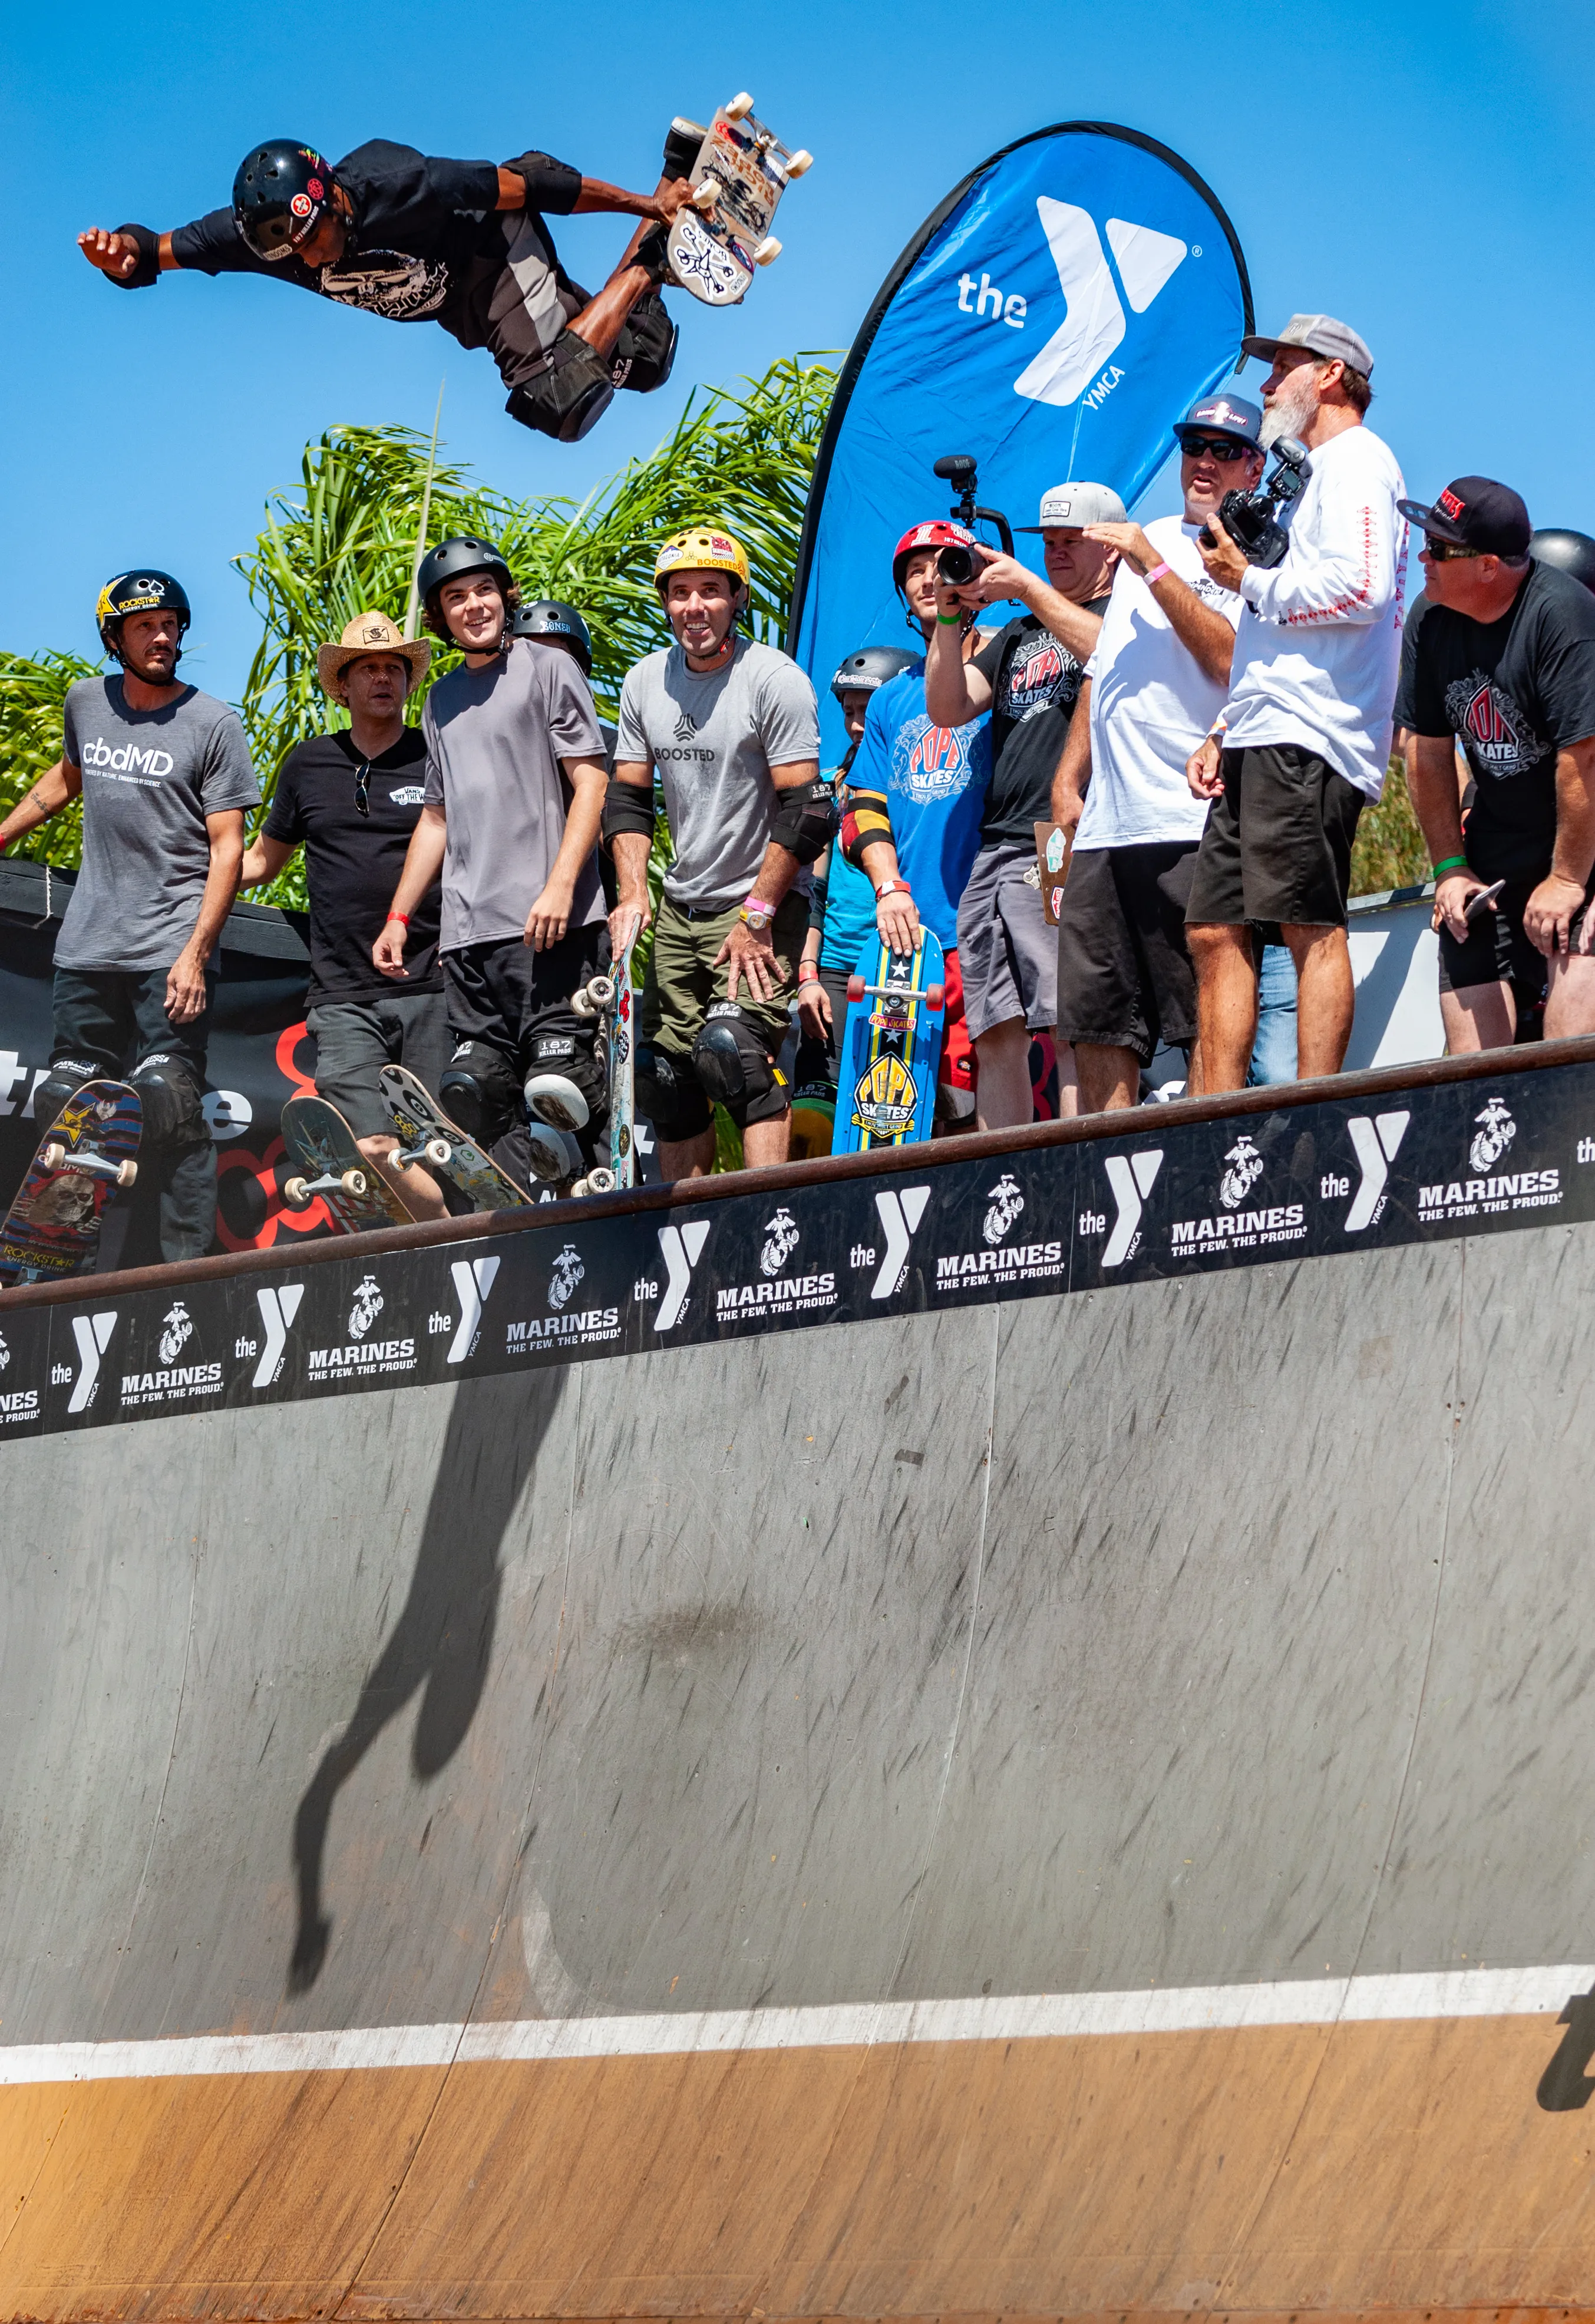 Behind the Scenes - Clash at Clairemont - Photo by Josh Utley